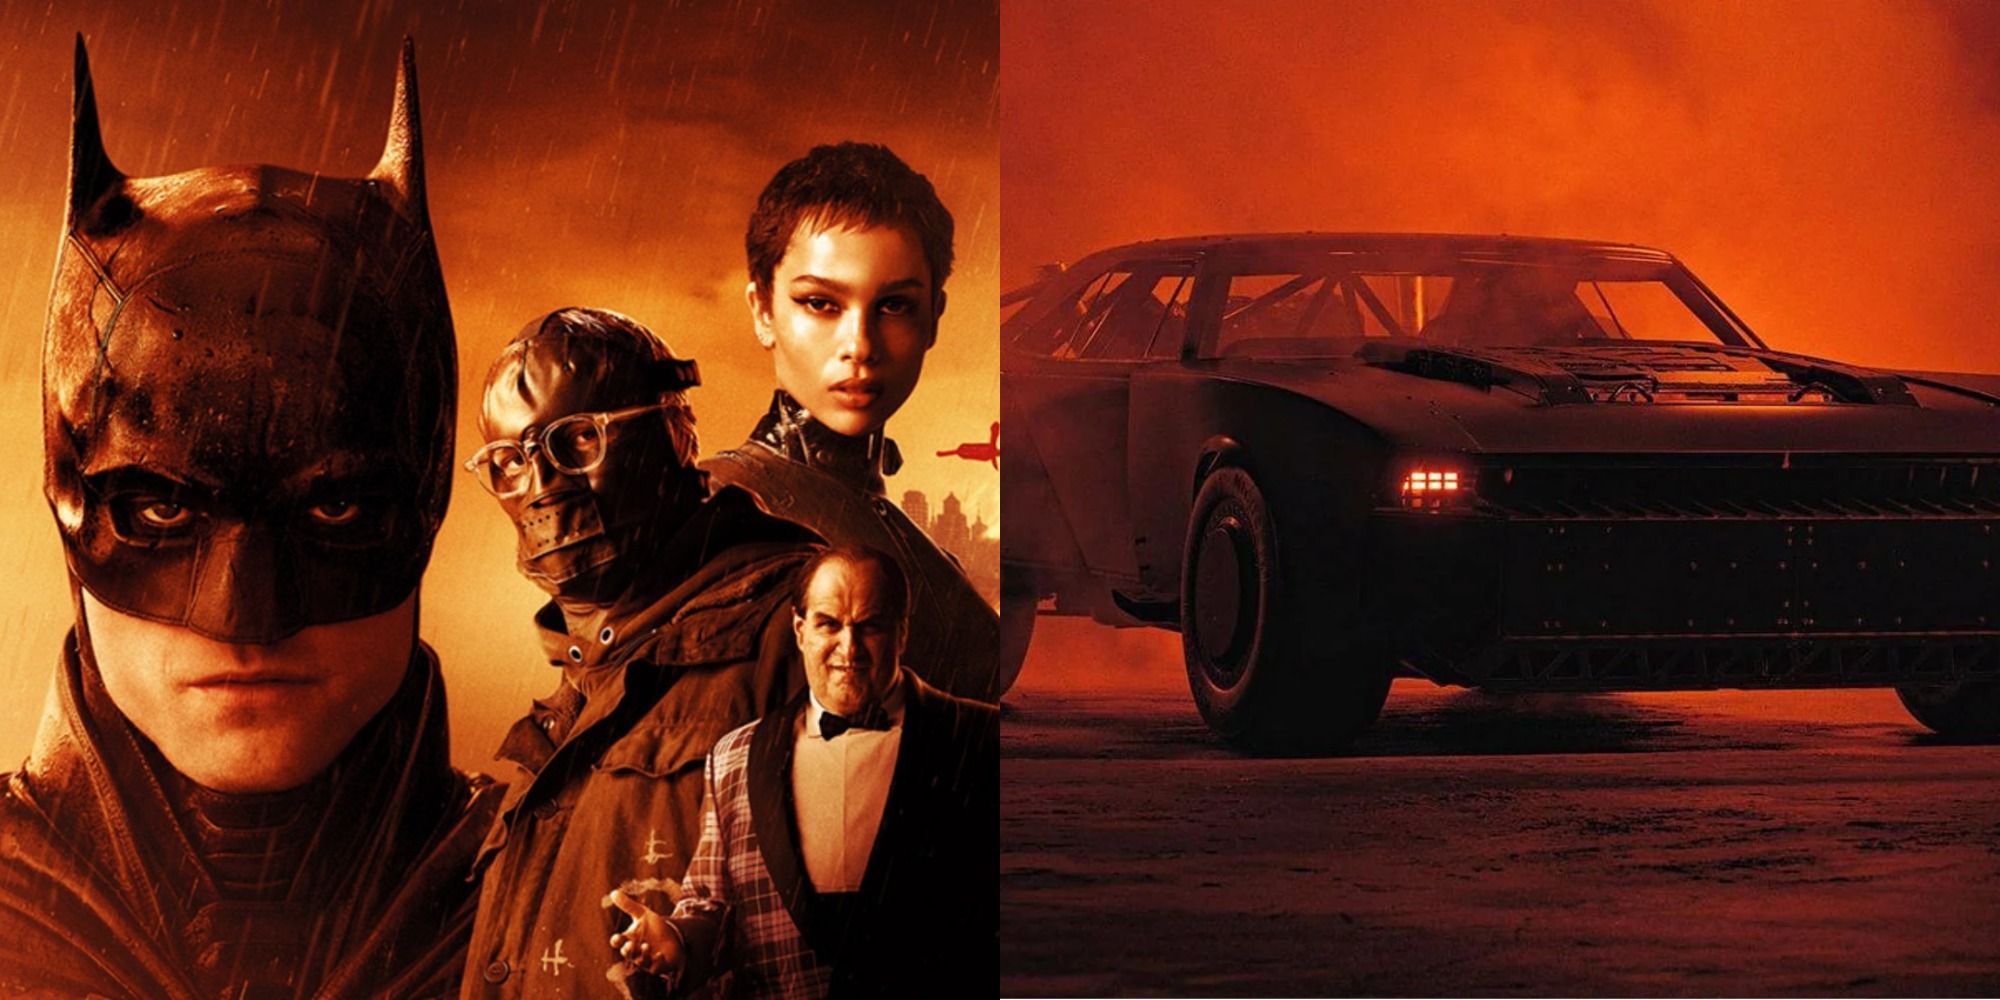 Split image showing the characters and the Batmobile from The Batman